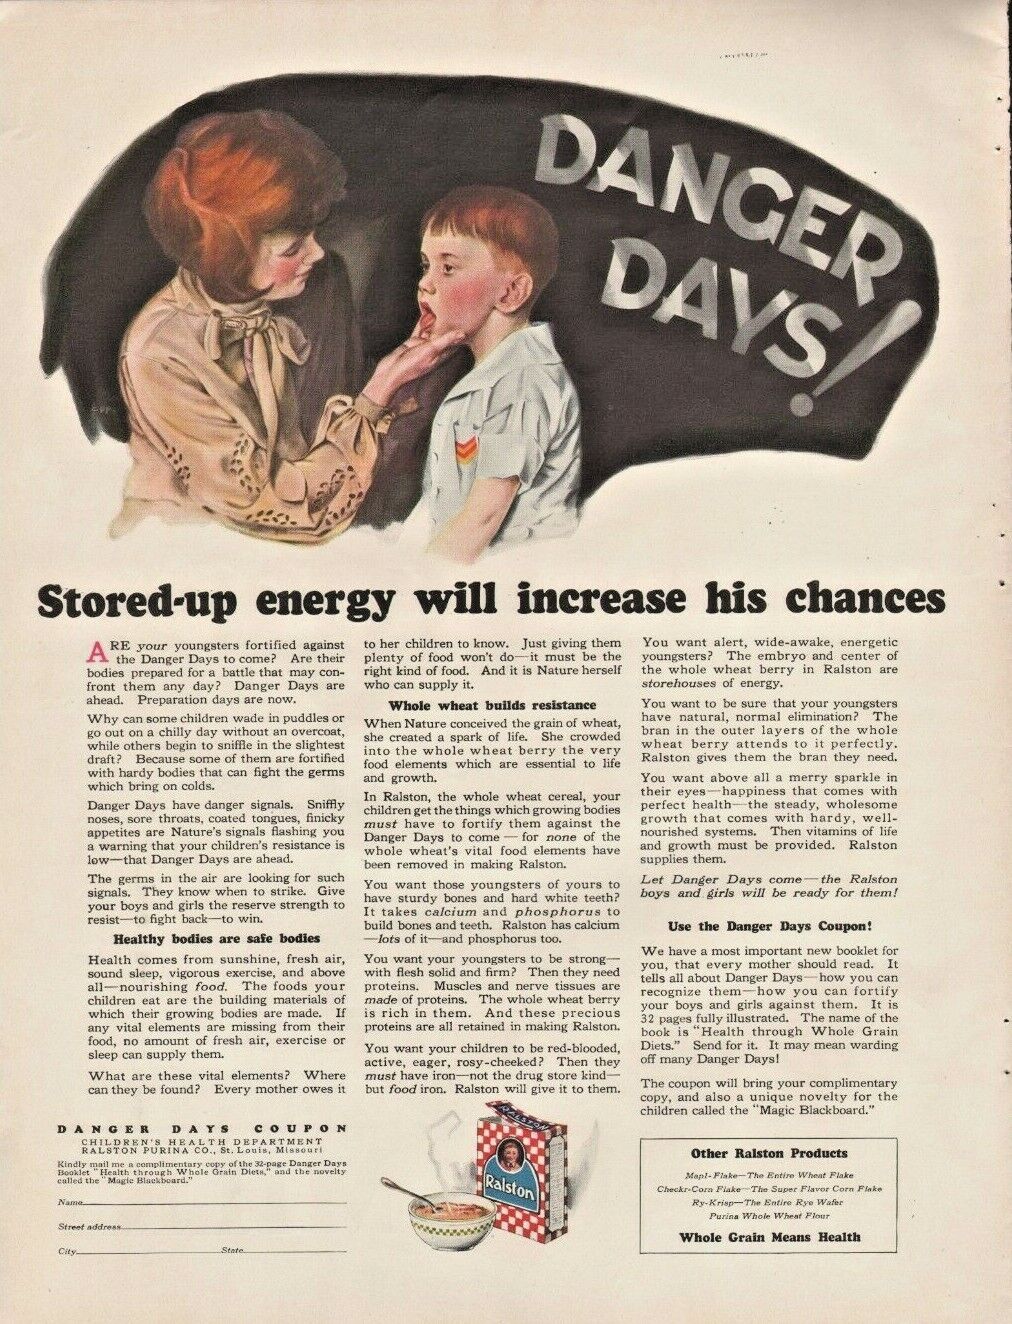 1927 Ralston Purina Cereal Danger Days Childrens Health Whole Grain - Vintage Ad